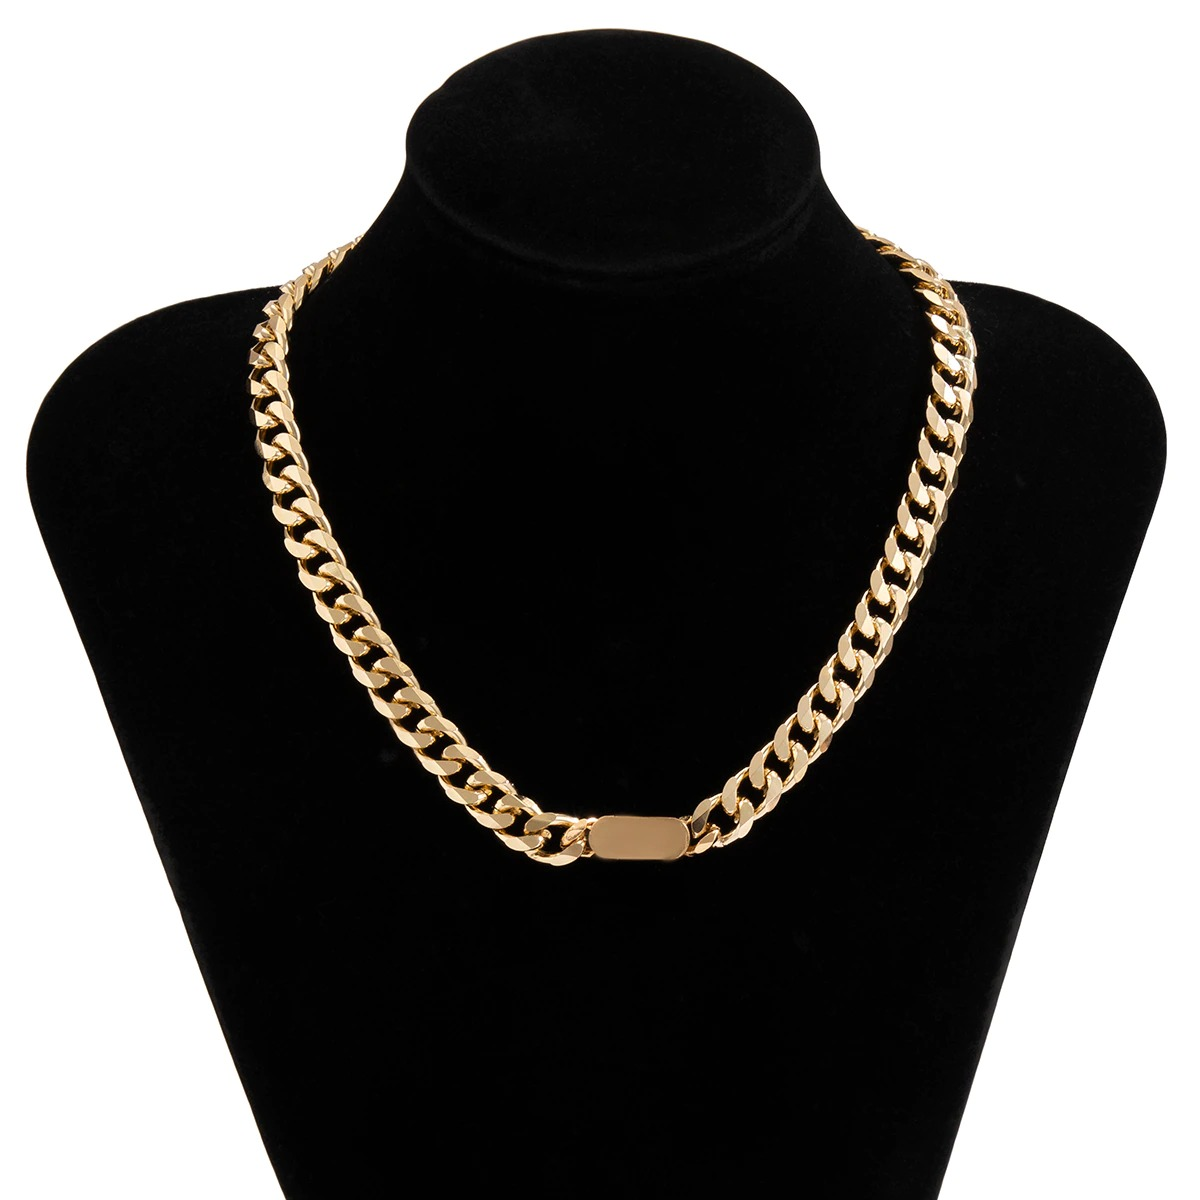 Women Cool Necklace of Gold Color / Smooth and Short Female Jewelry - HARD'N'HEAVY